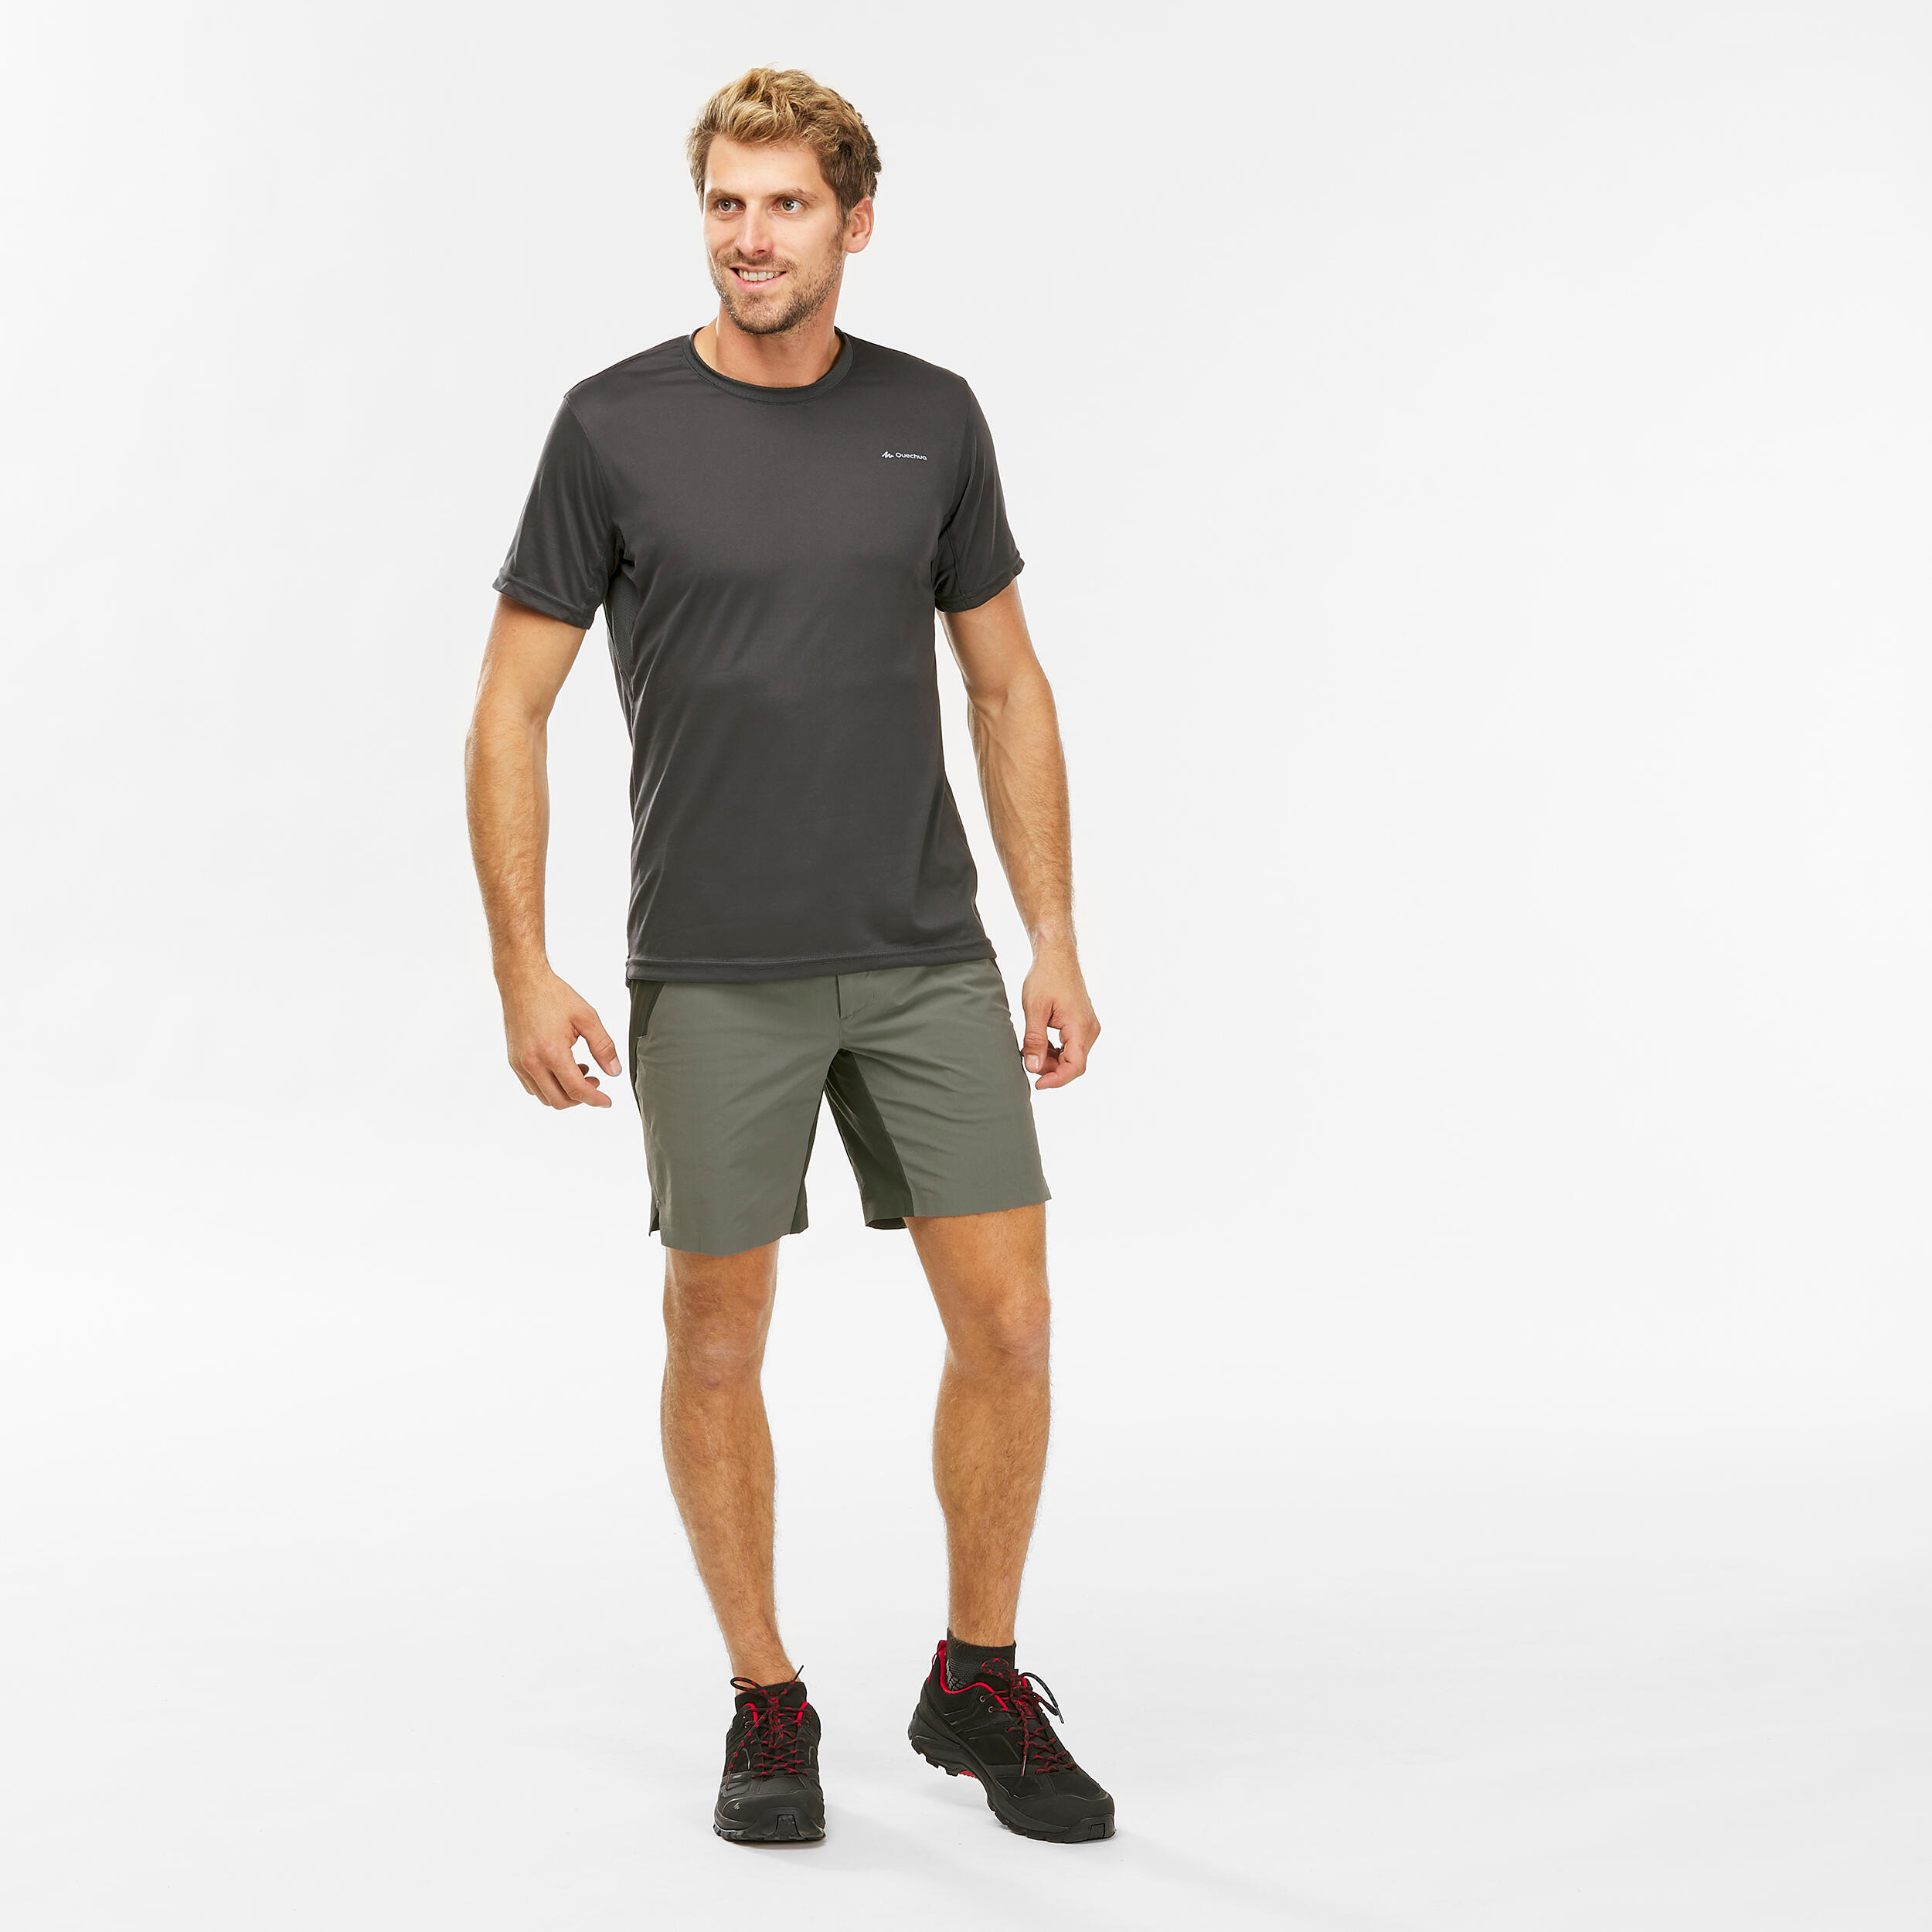 Men's Hiking Synthetic Short-Sleeved T-Shirt  MH100 3/4